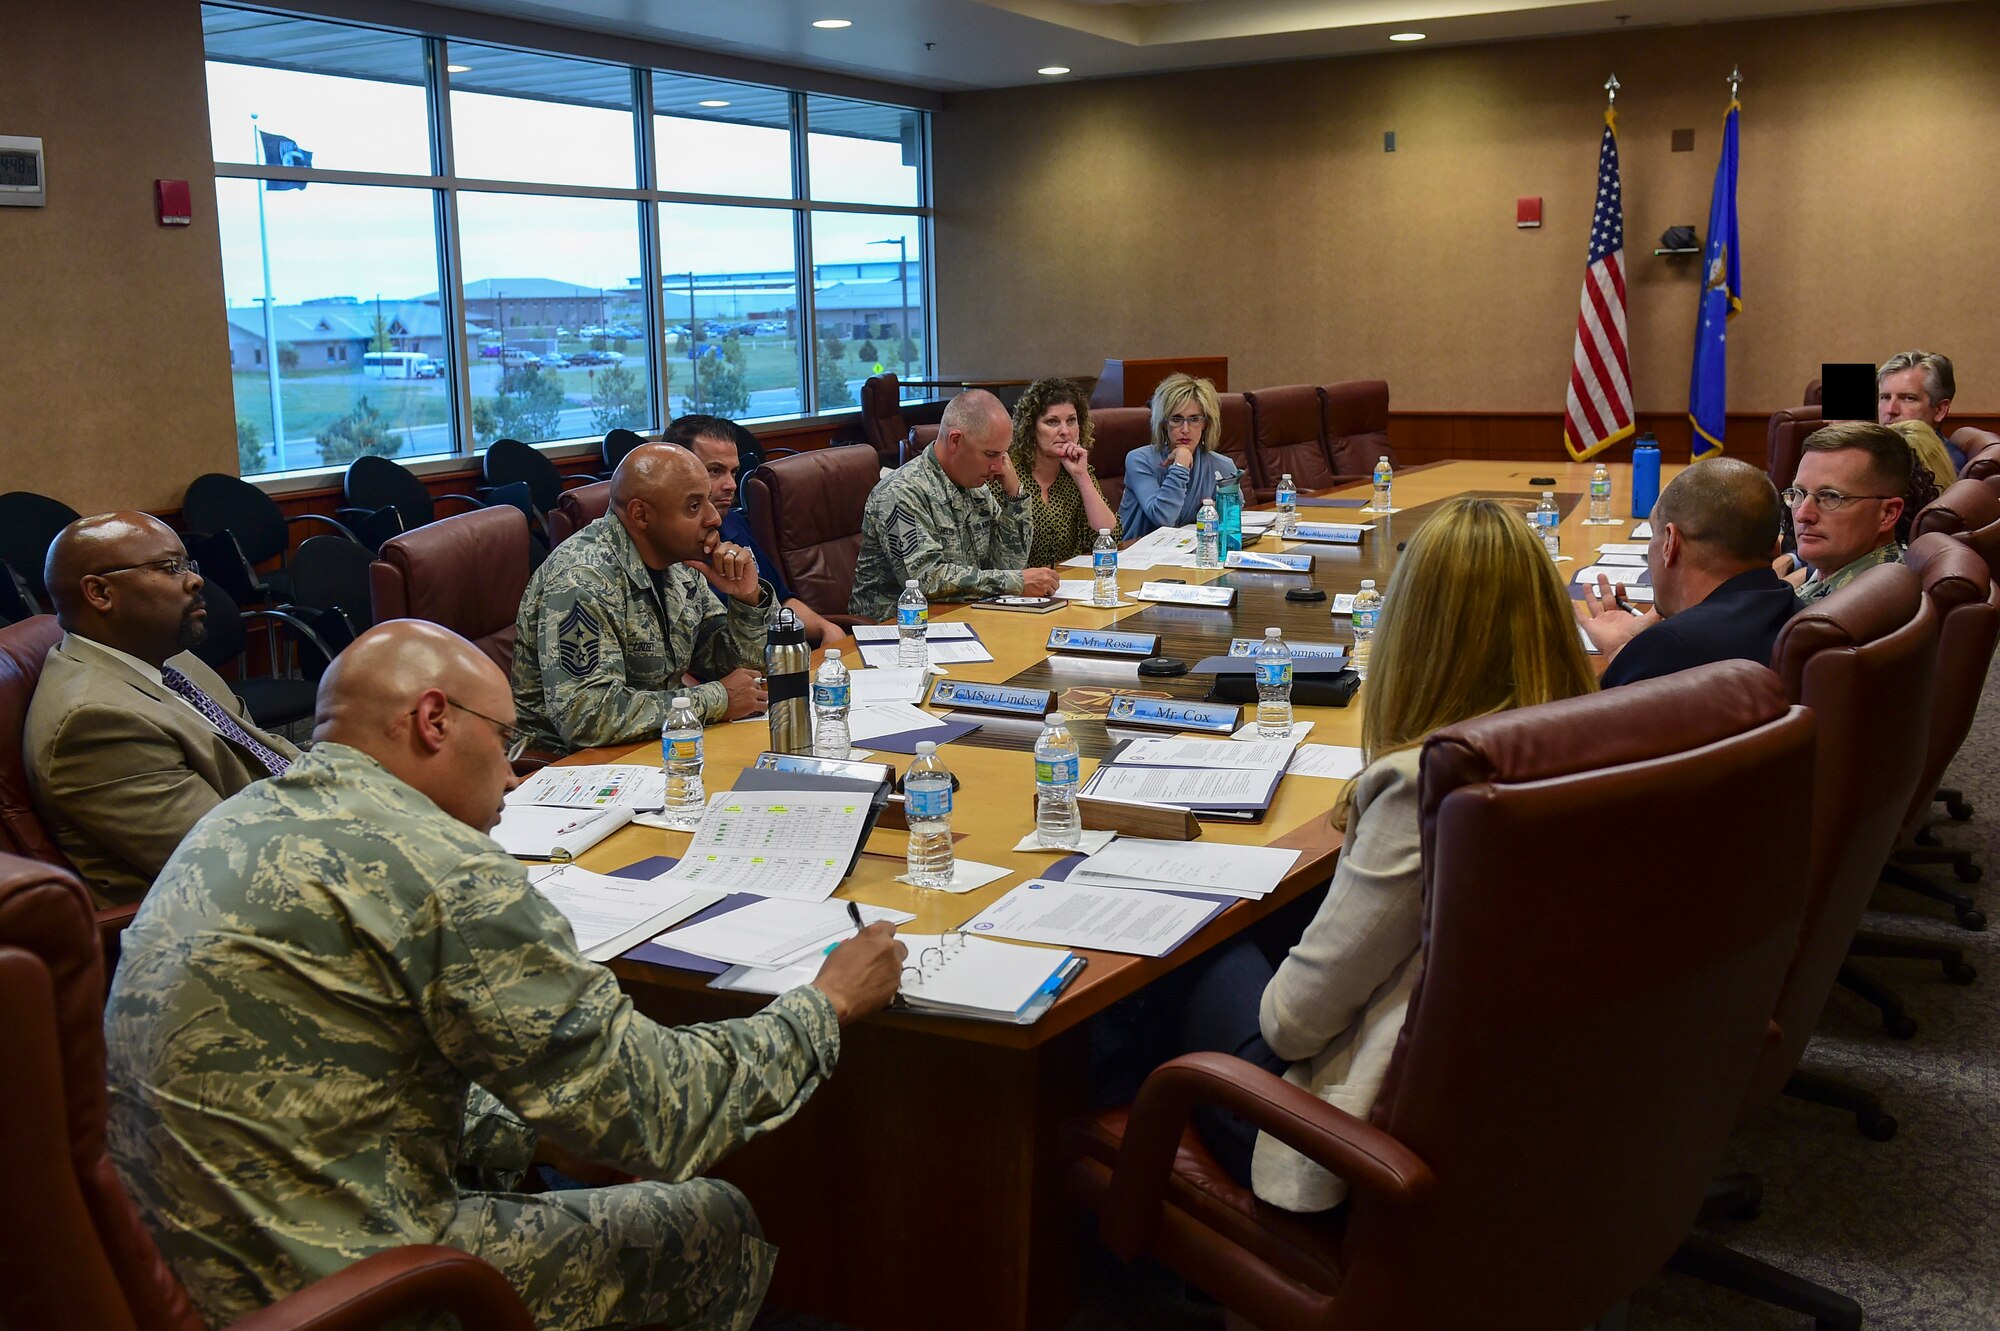 Leadership from Buckley Air Force Base and the Aurora School District discuss the relationship between the base and local schools June 5, 2017, on Buckley AFB, Colo. The meeting highlighted the importance of the school district’s outreach to military families and support for children with deployed parents. (U.S. Air Force photo by Airman Jacob Deatherage/Released)